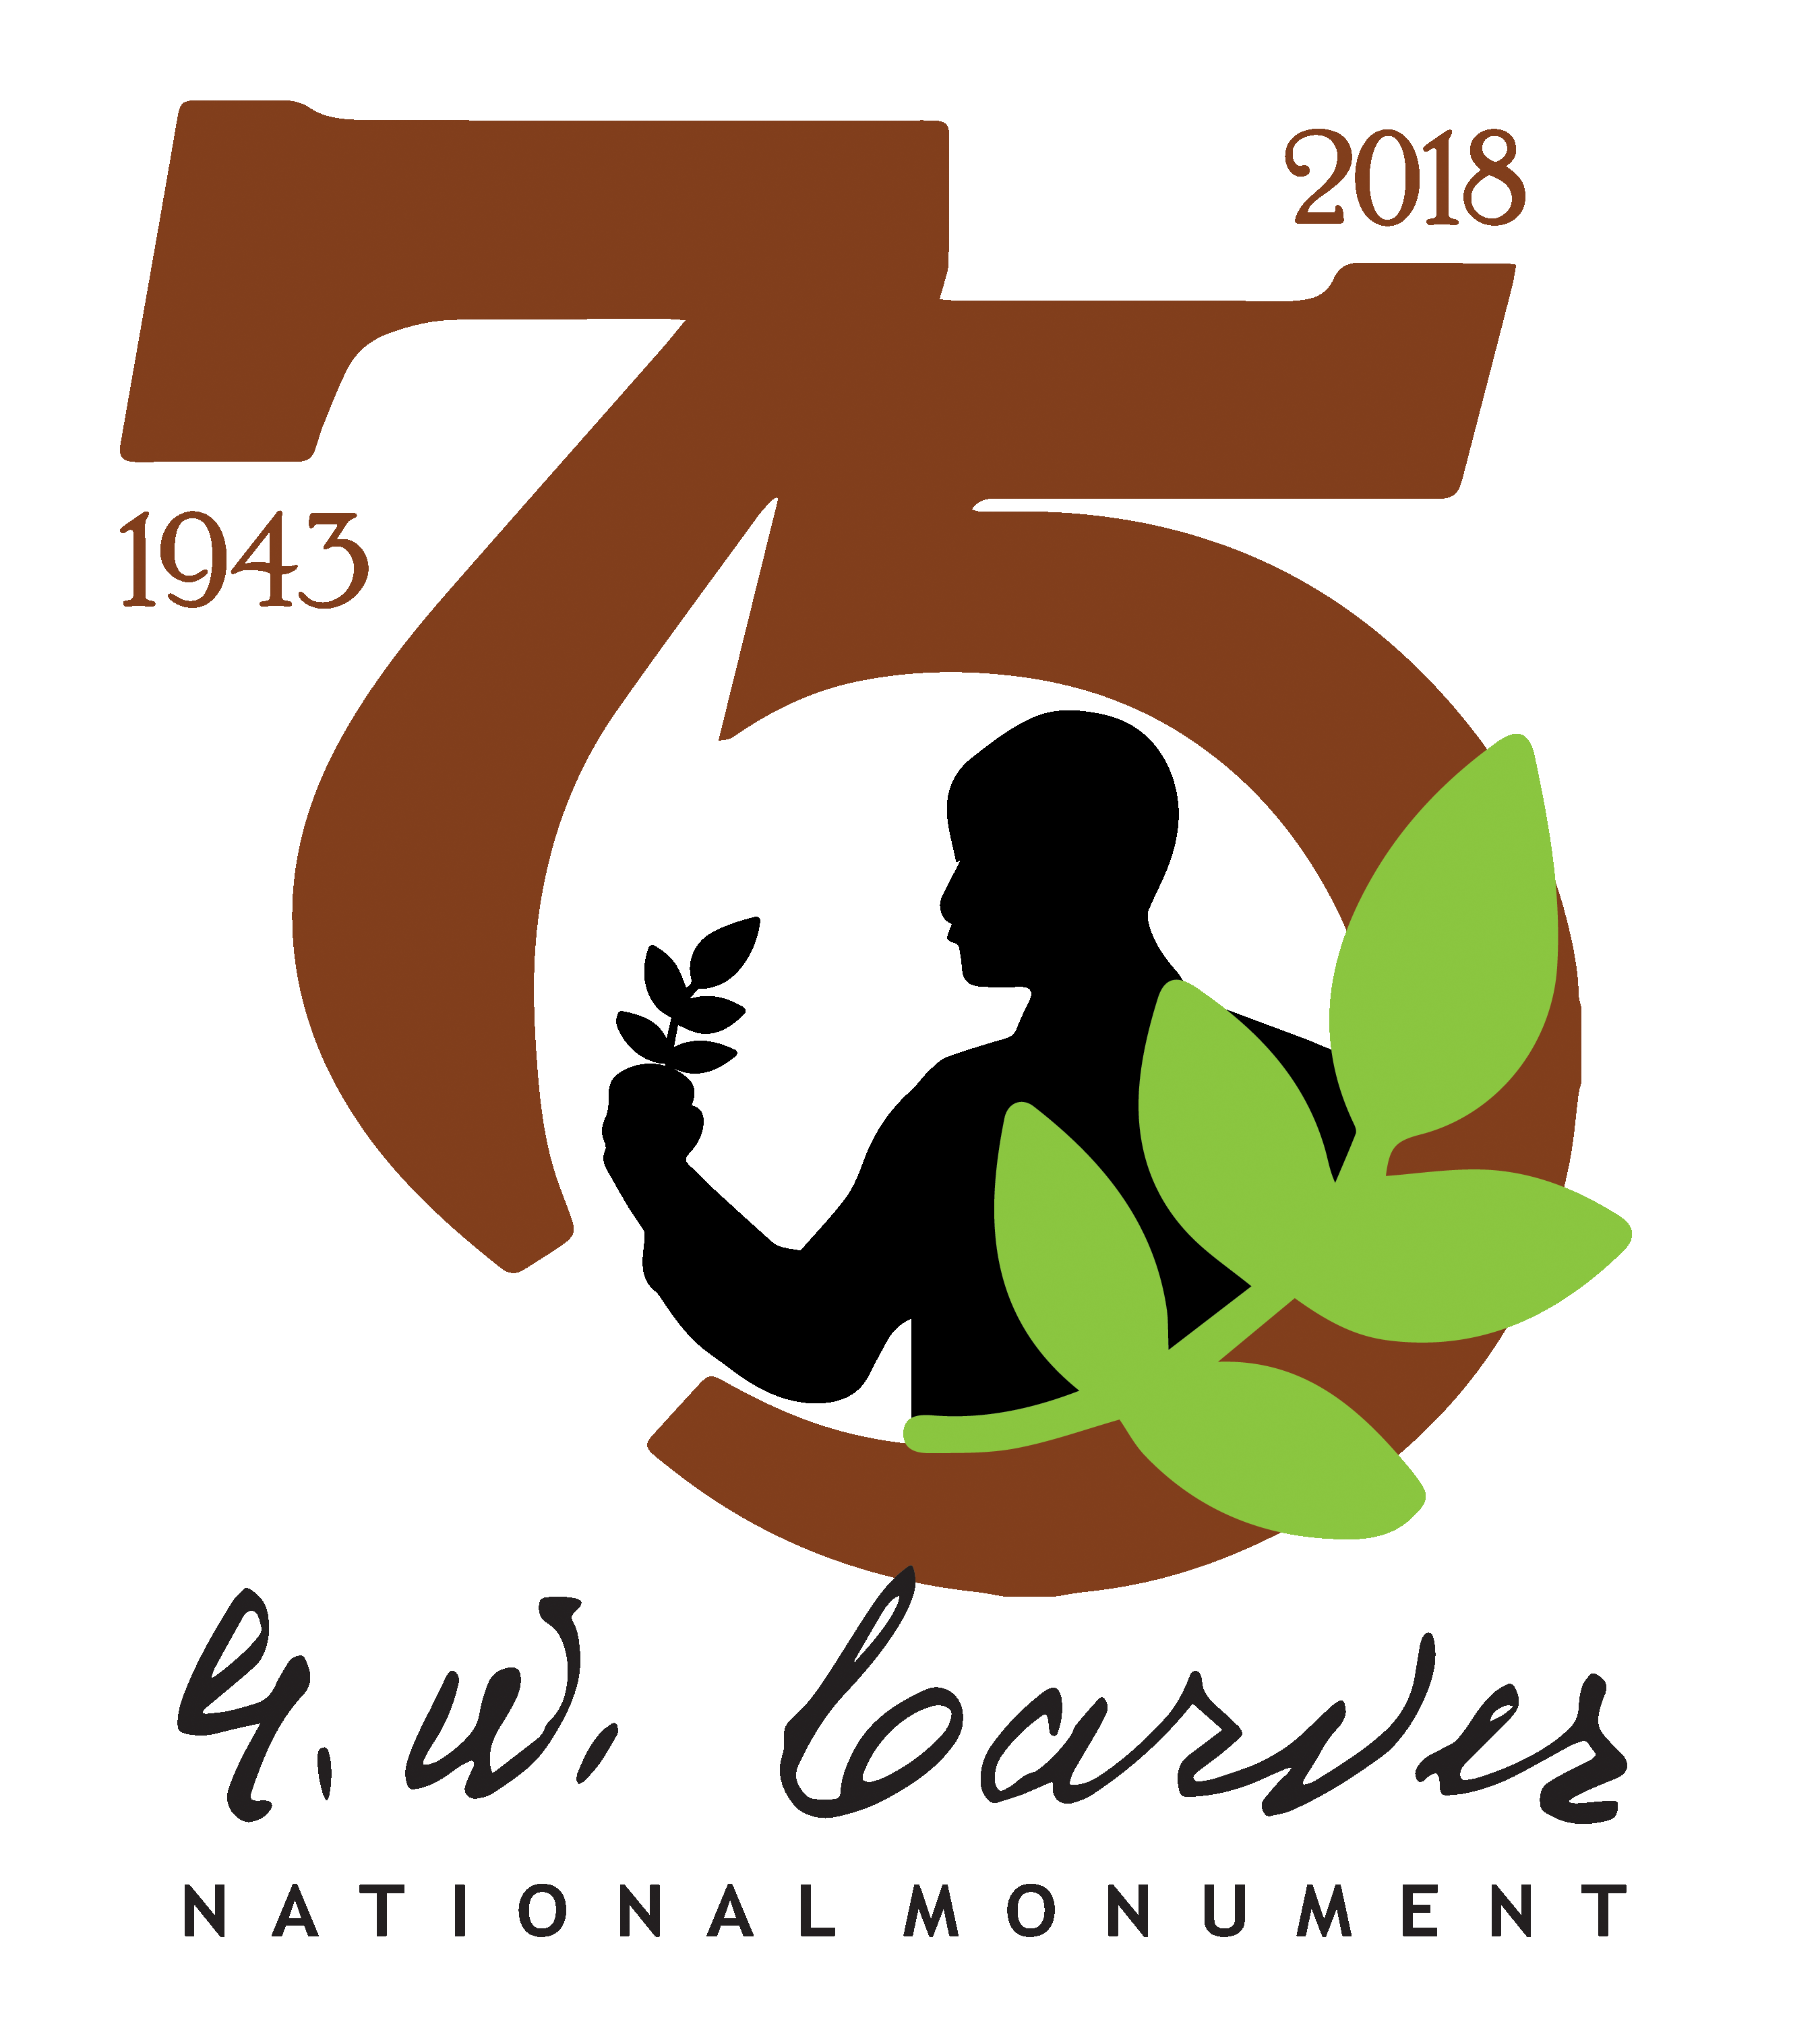 Image is for the 75th  Anniversary of the park.